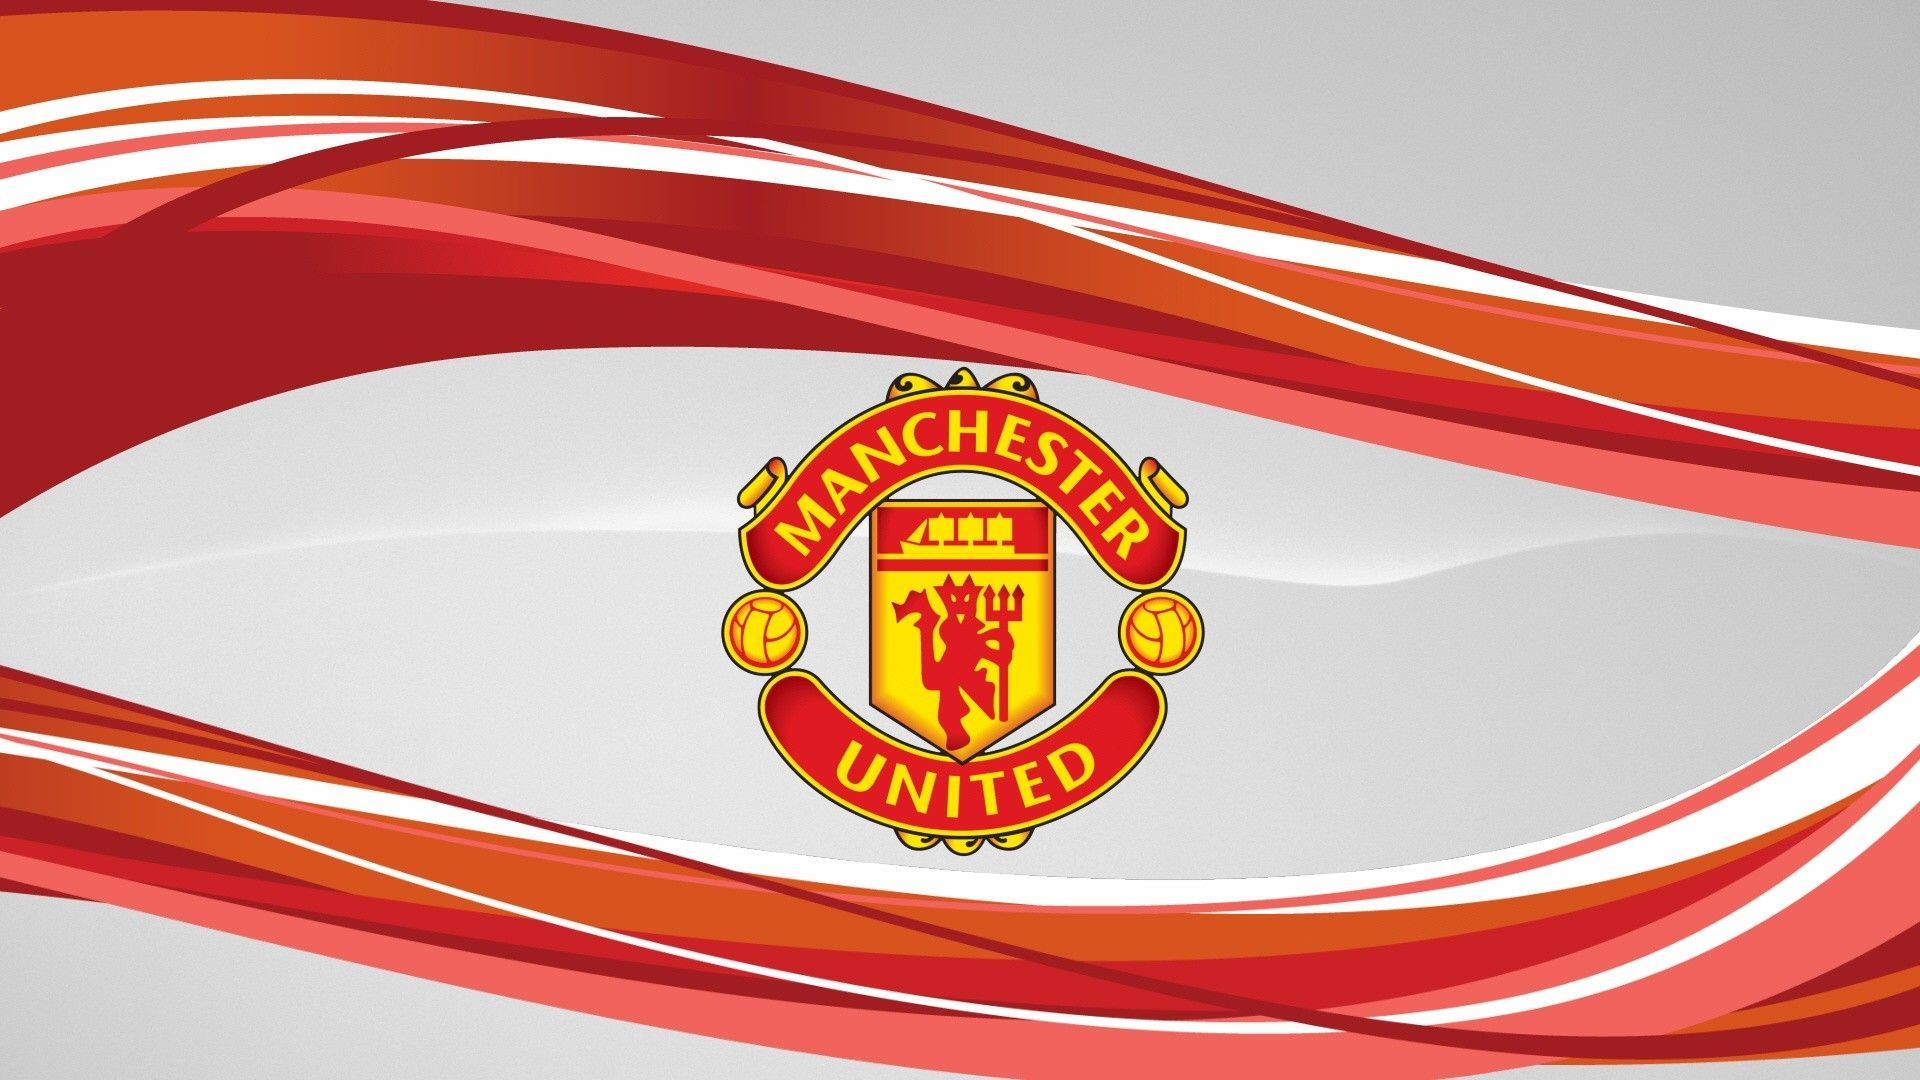 Manchester United Abstract Hd Wallpaper Wallpaper Cool